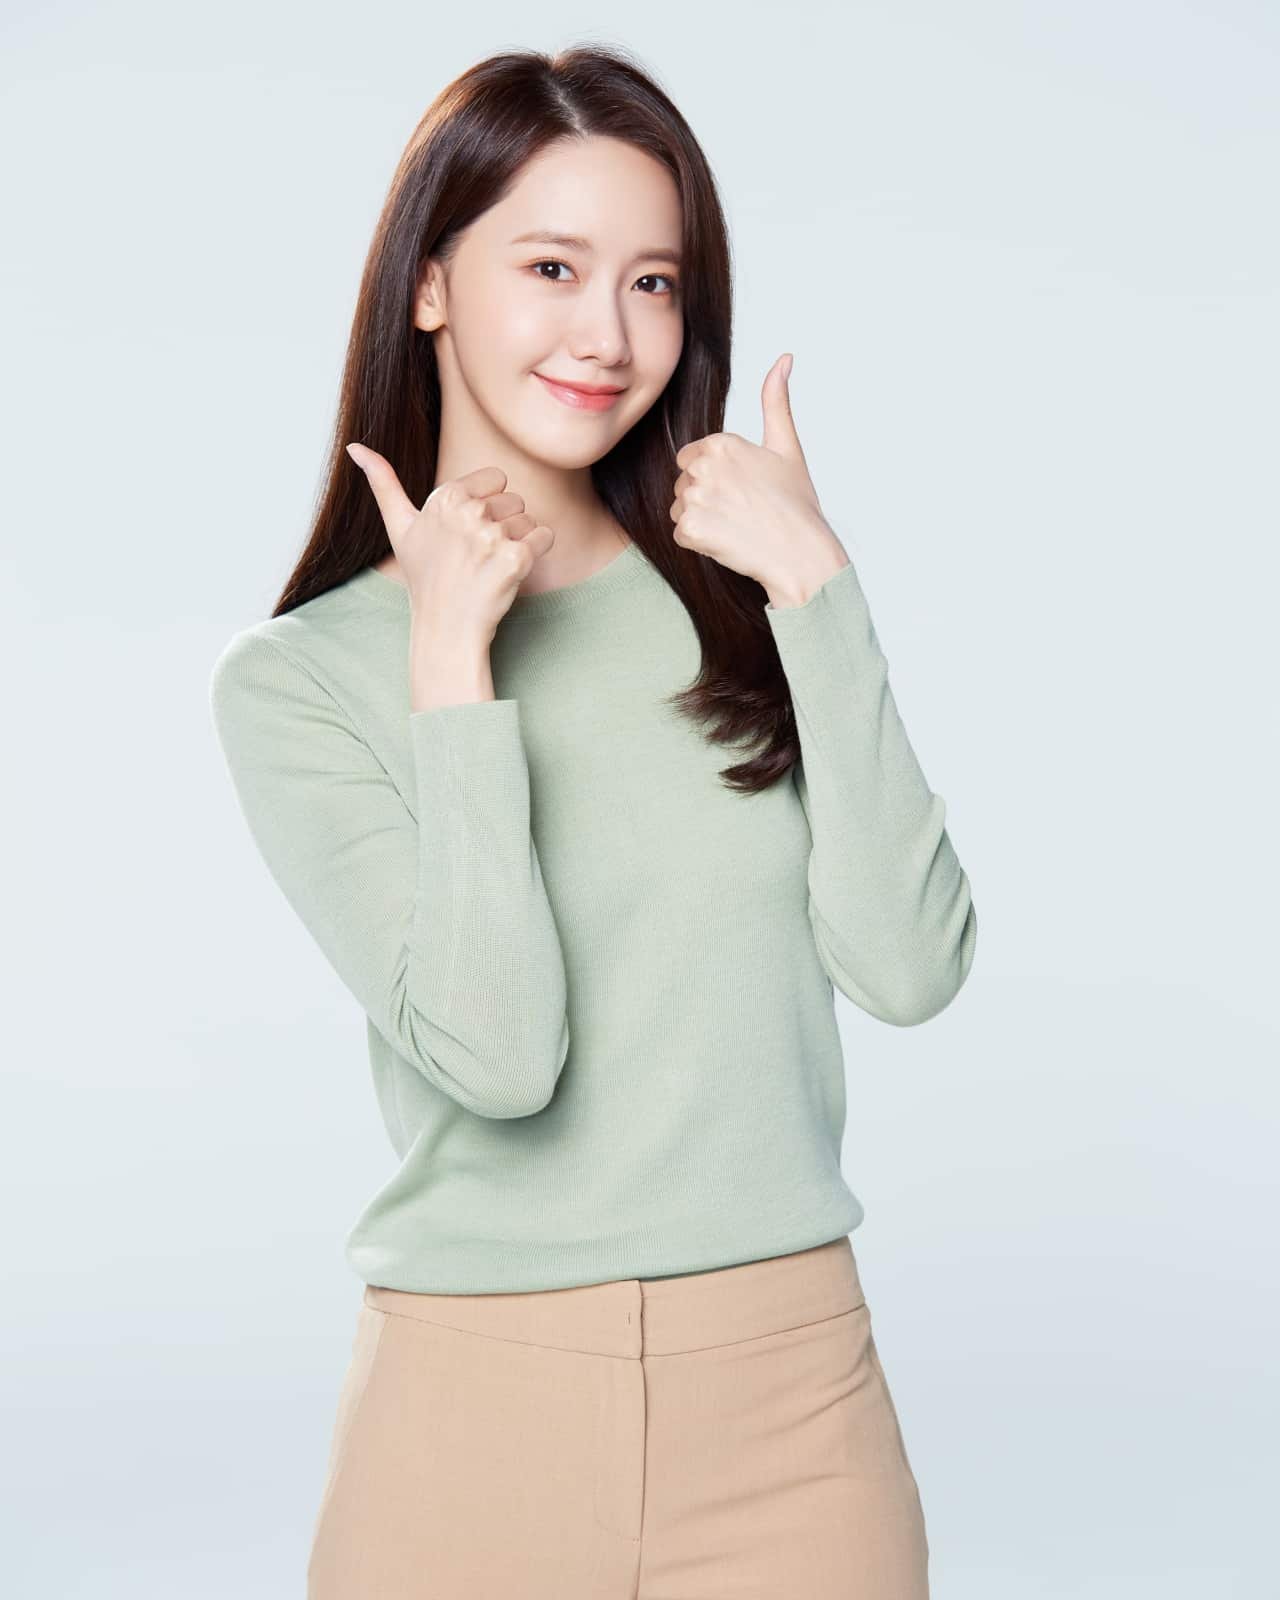 DB Damage Insurance Re-signs Advertising Model with YoonA of SNSD